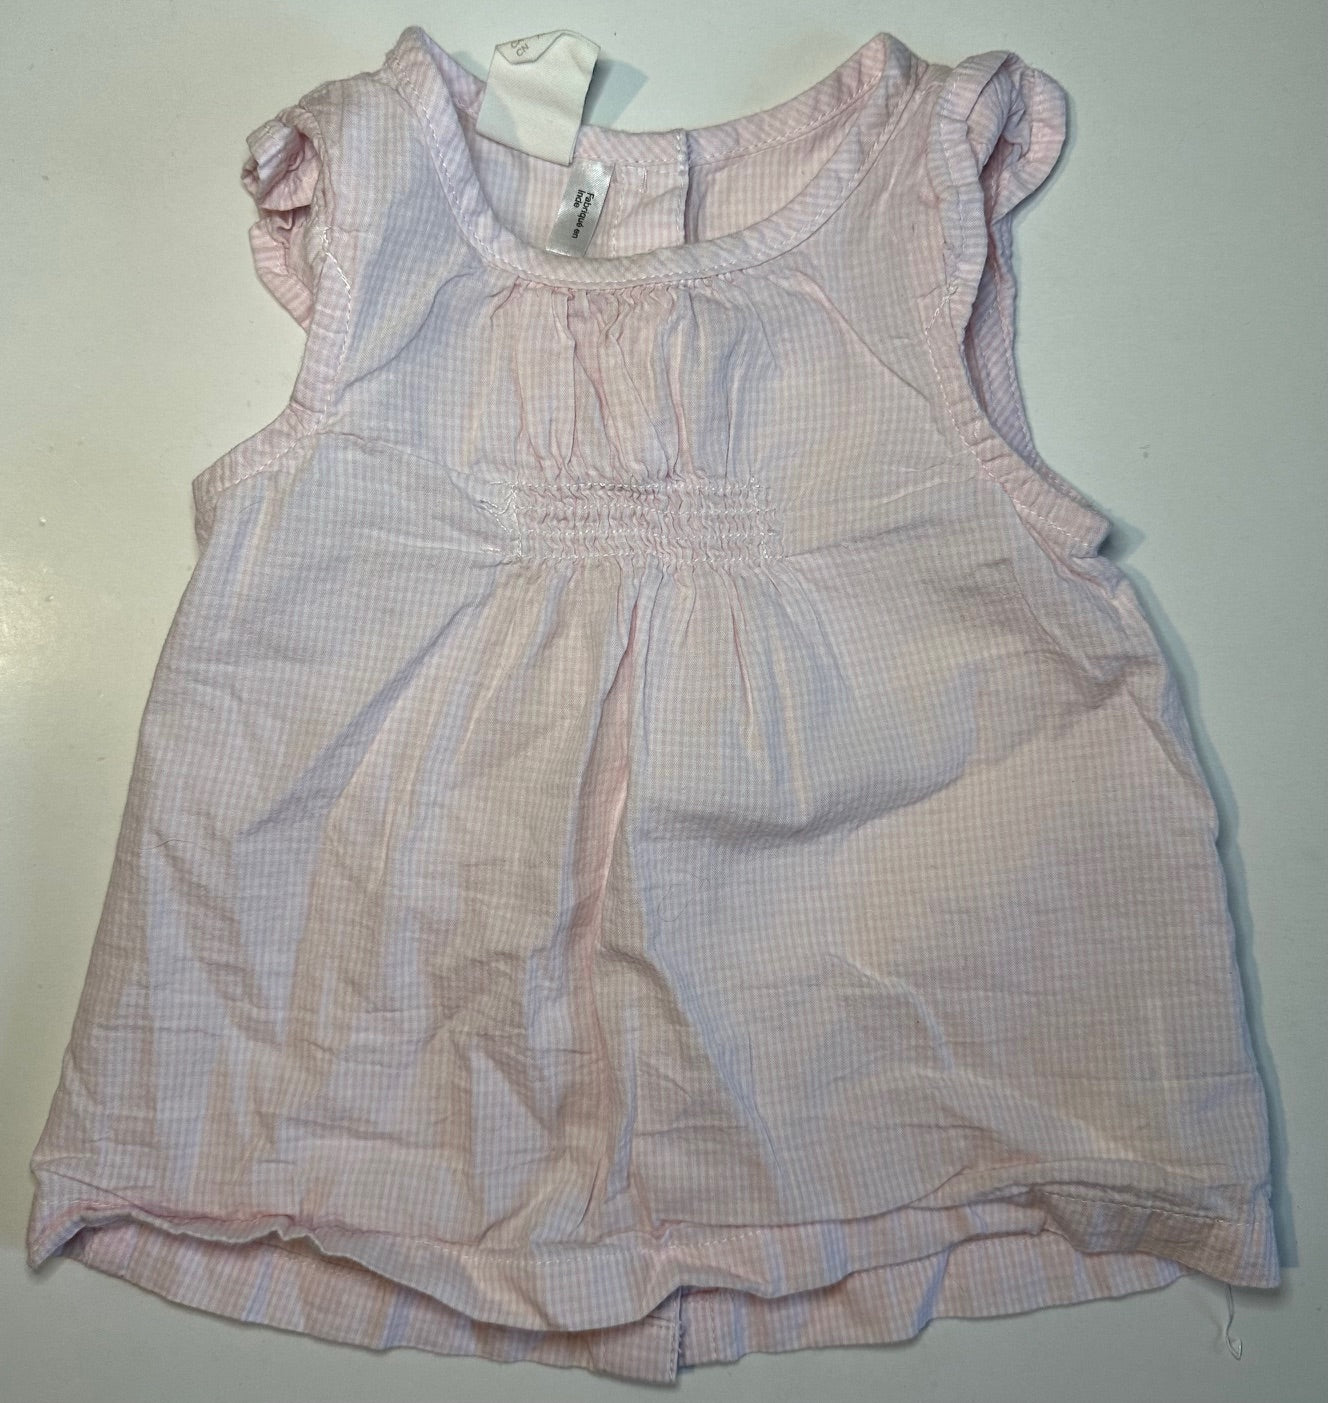 H&M, Pale Pink and White Top - 6-9 Months